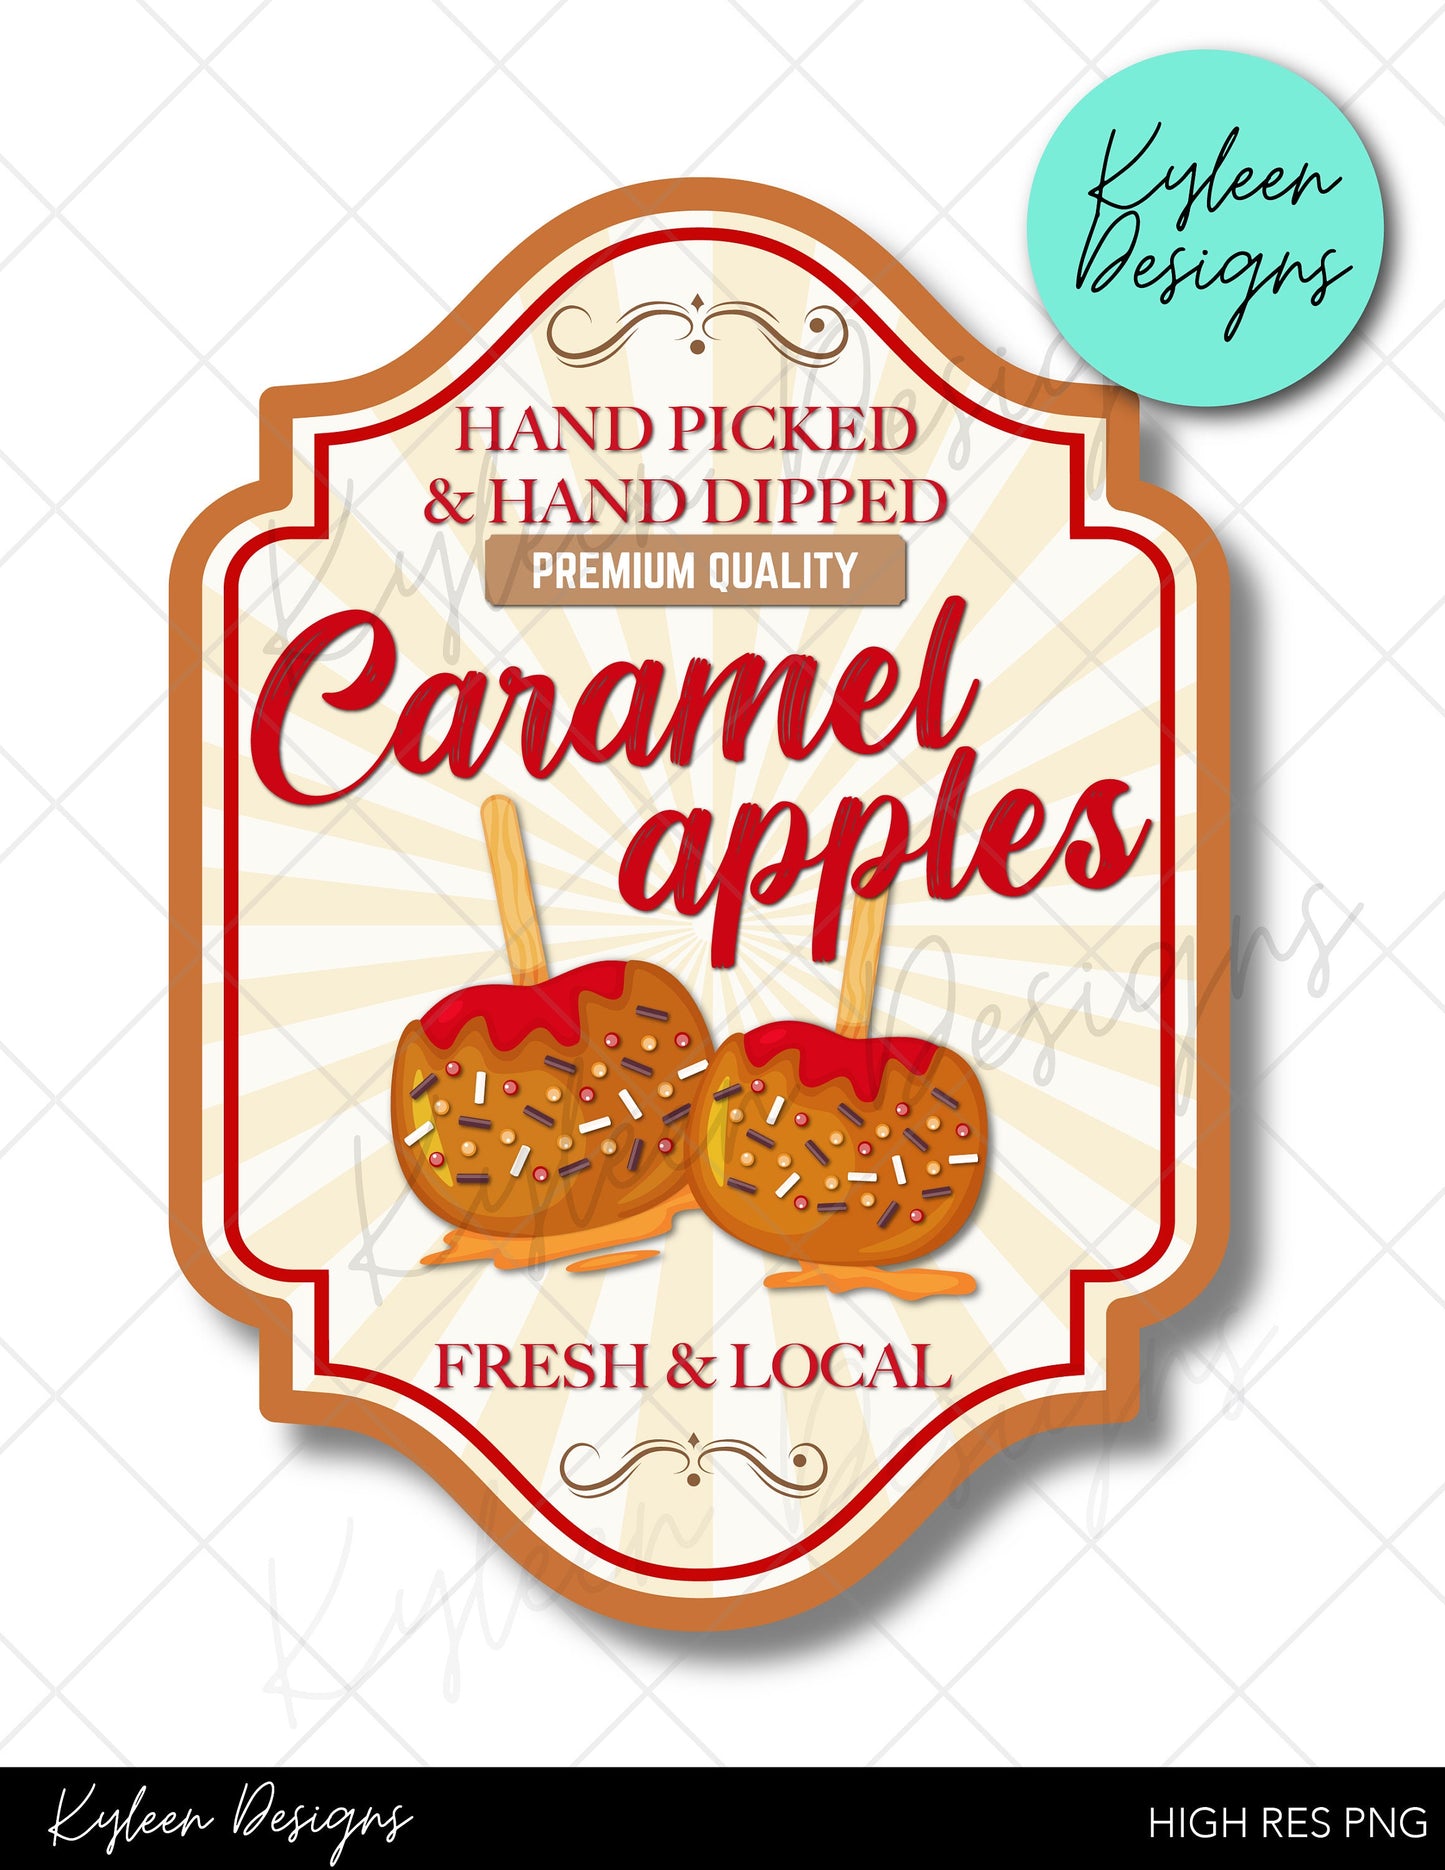 Red Caramel Apple label High RES PNG for coffee/beer glass